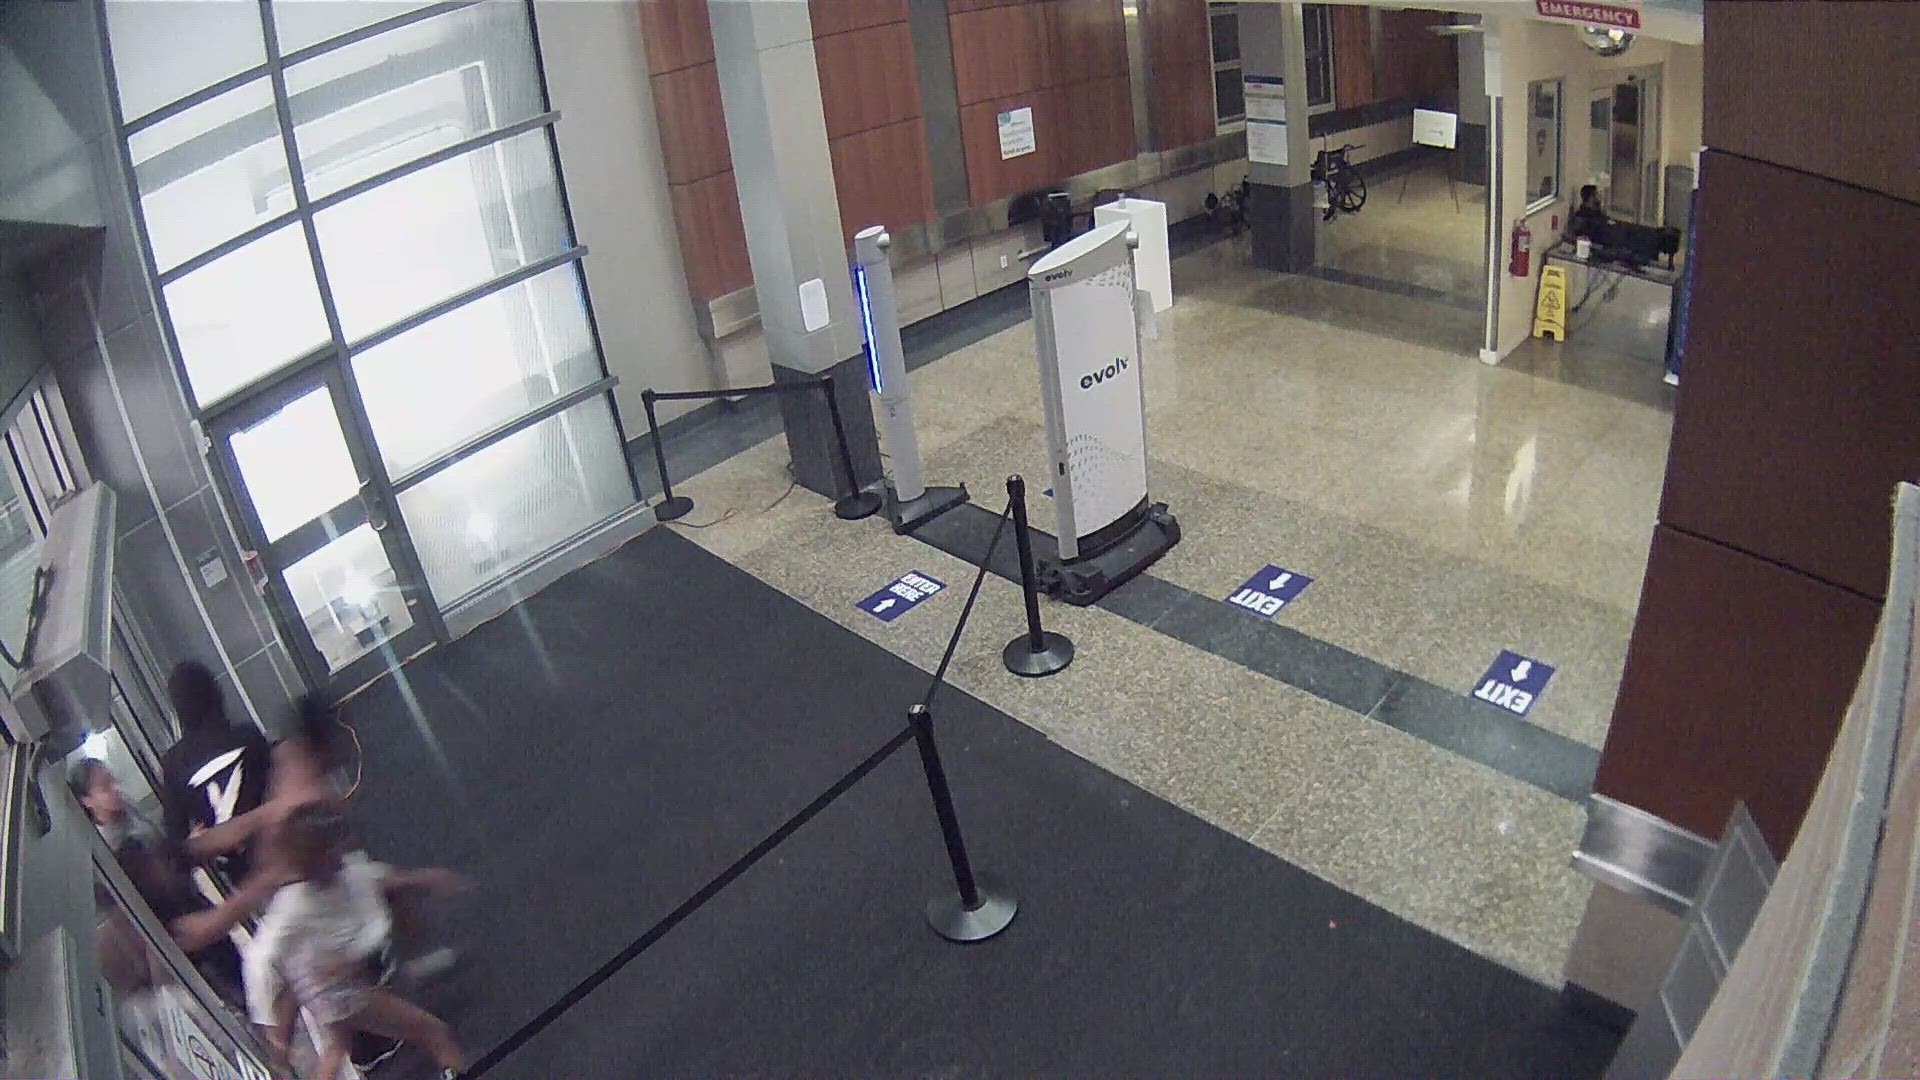 A scuffle ensued in the lobby of Cleveland MetroHealth's main campus on Sunday morning, new security footage shows.